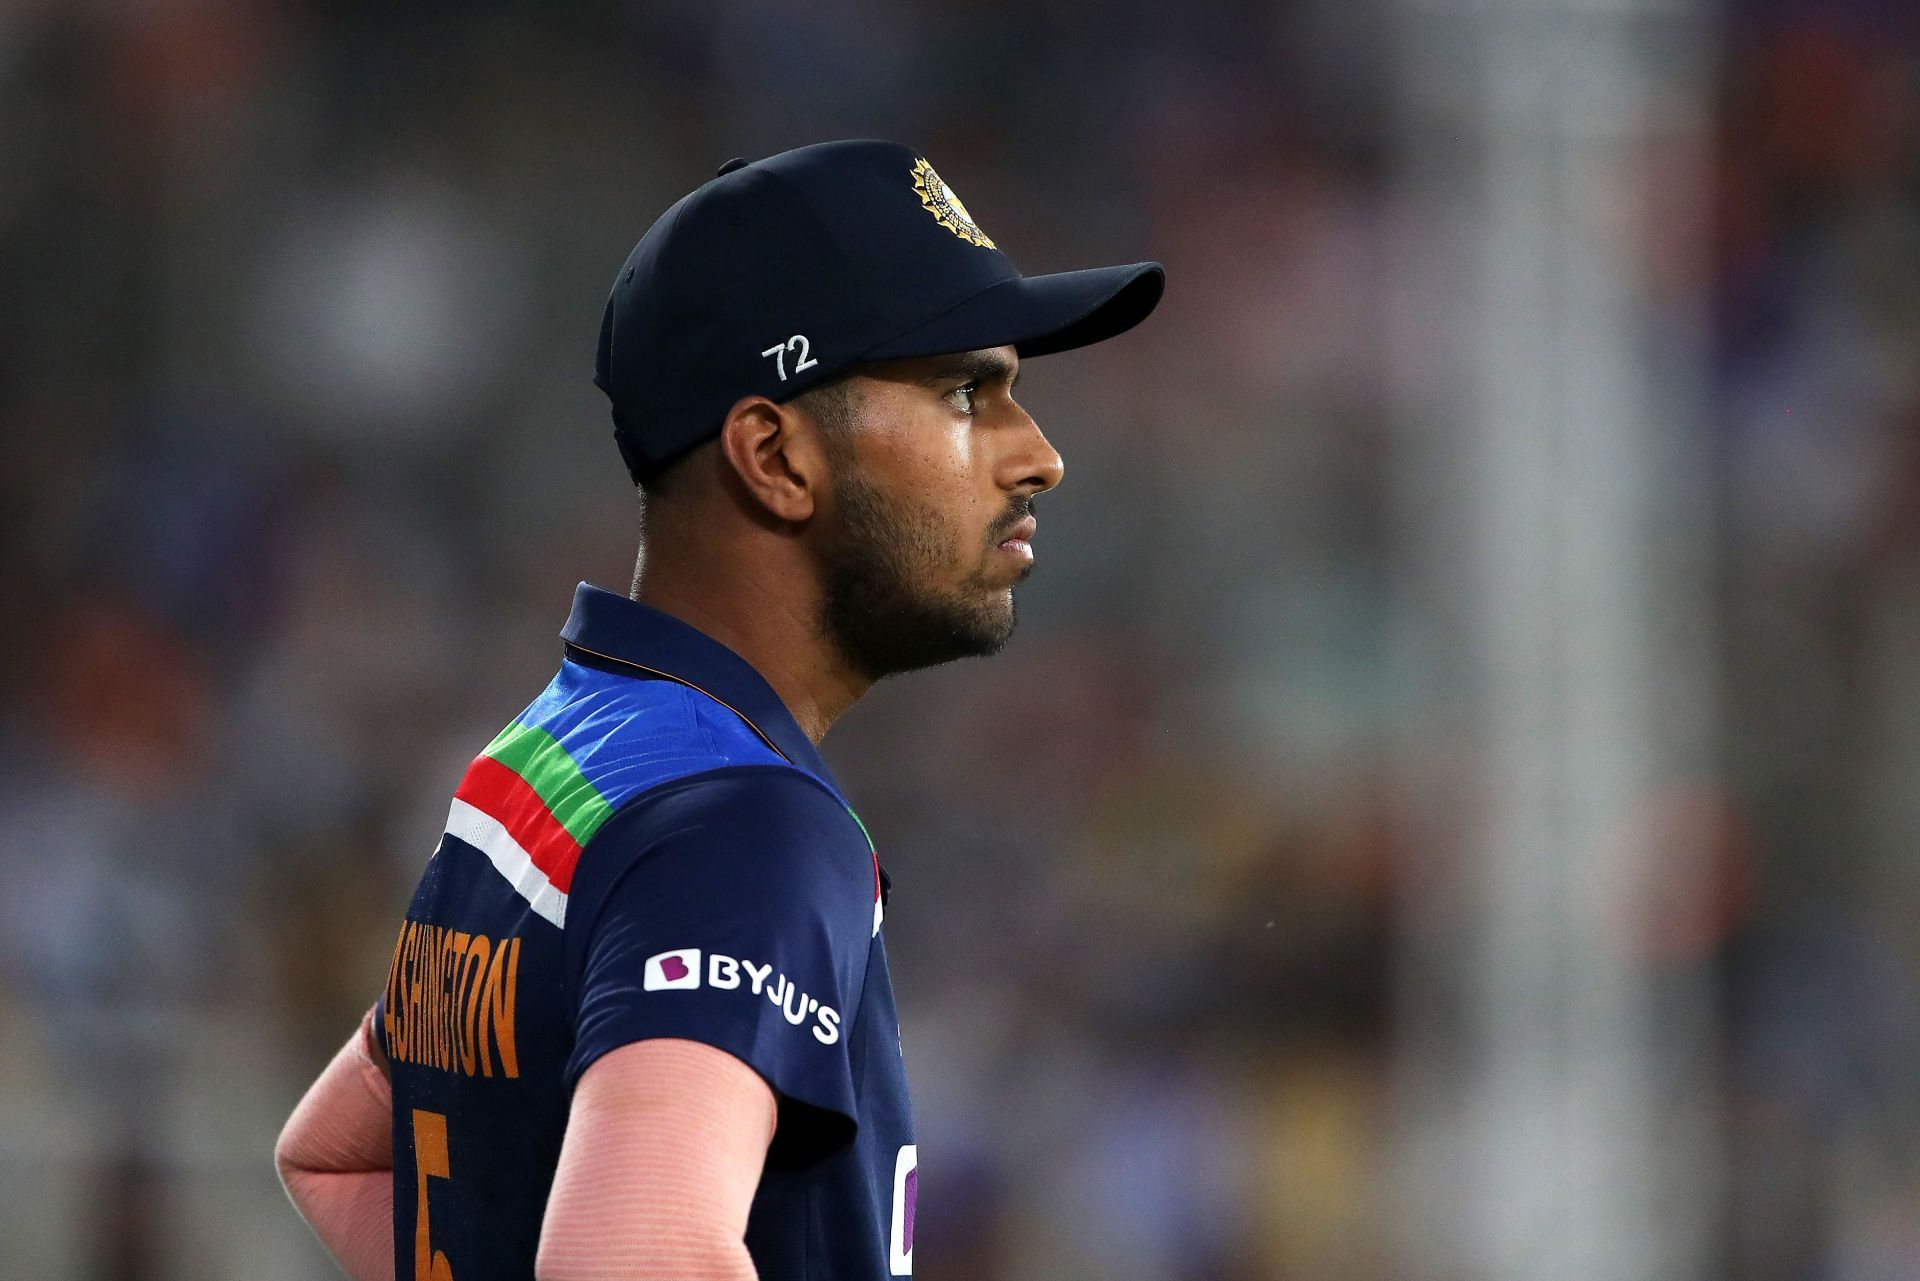 Washington Sundar is currently sidelined due to an injury